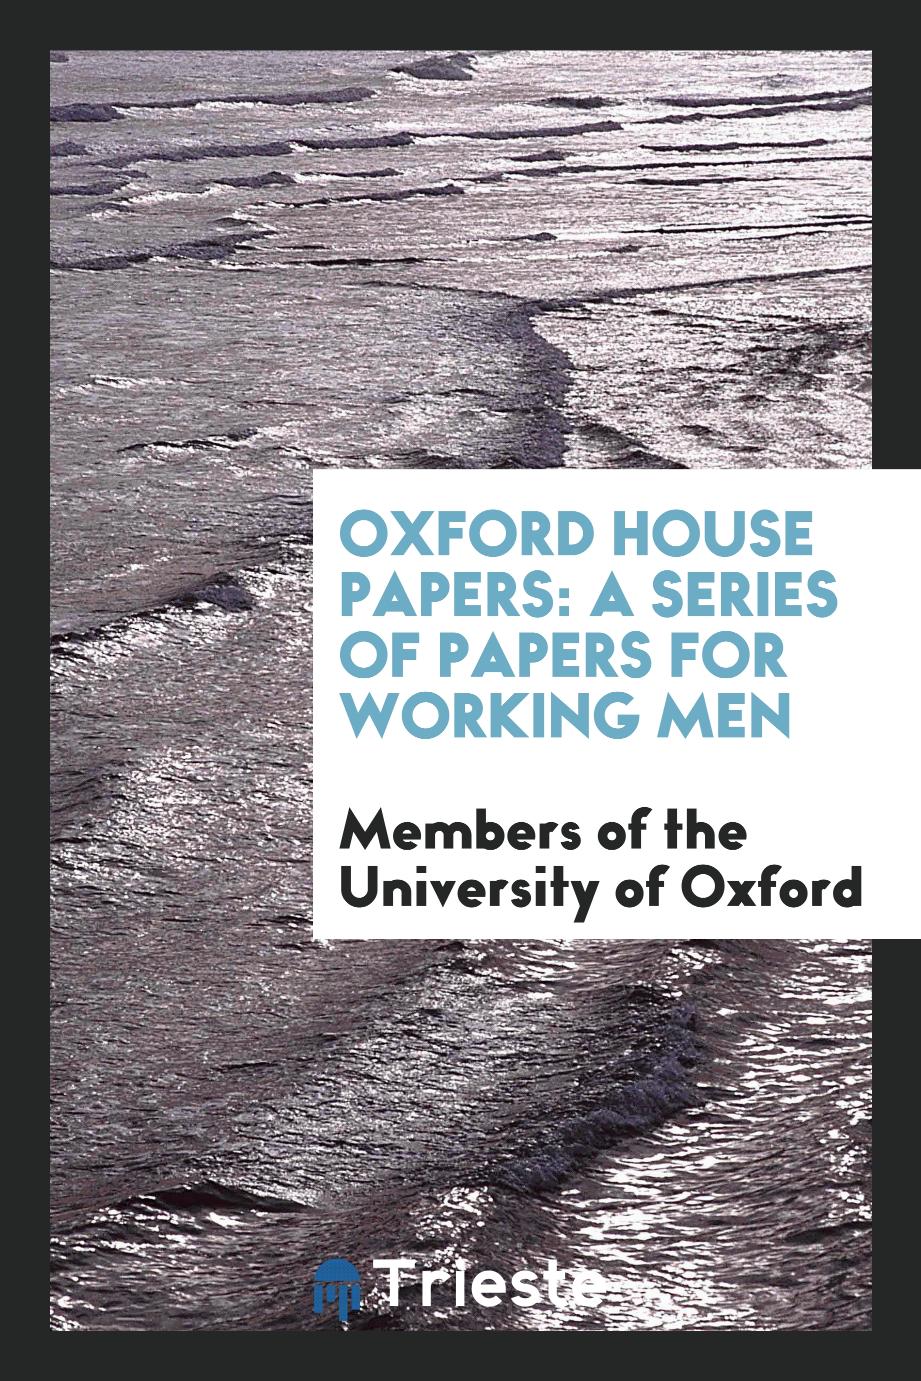 Oxford house papers: a series of papers for working men